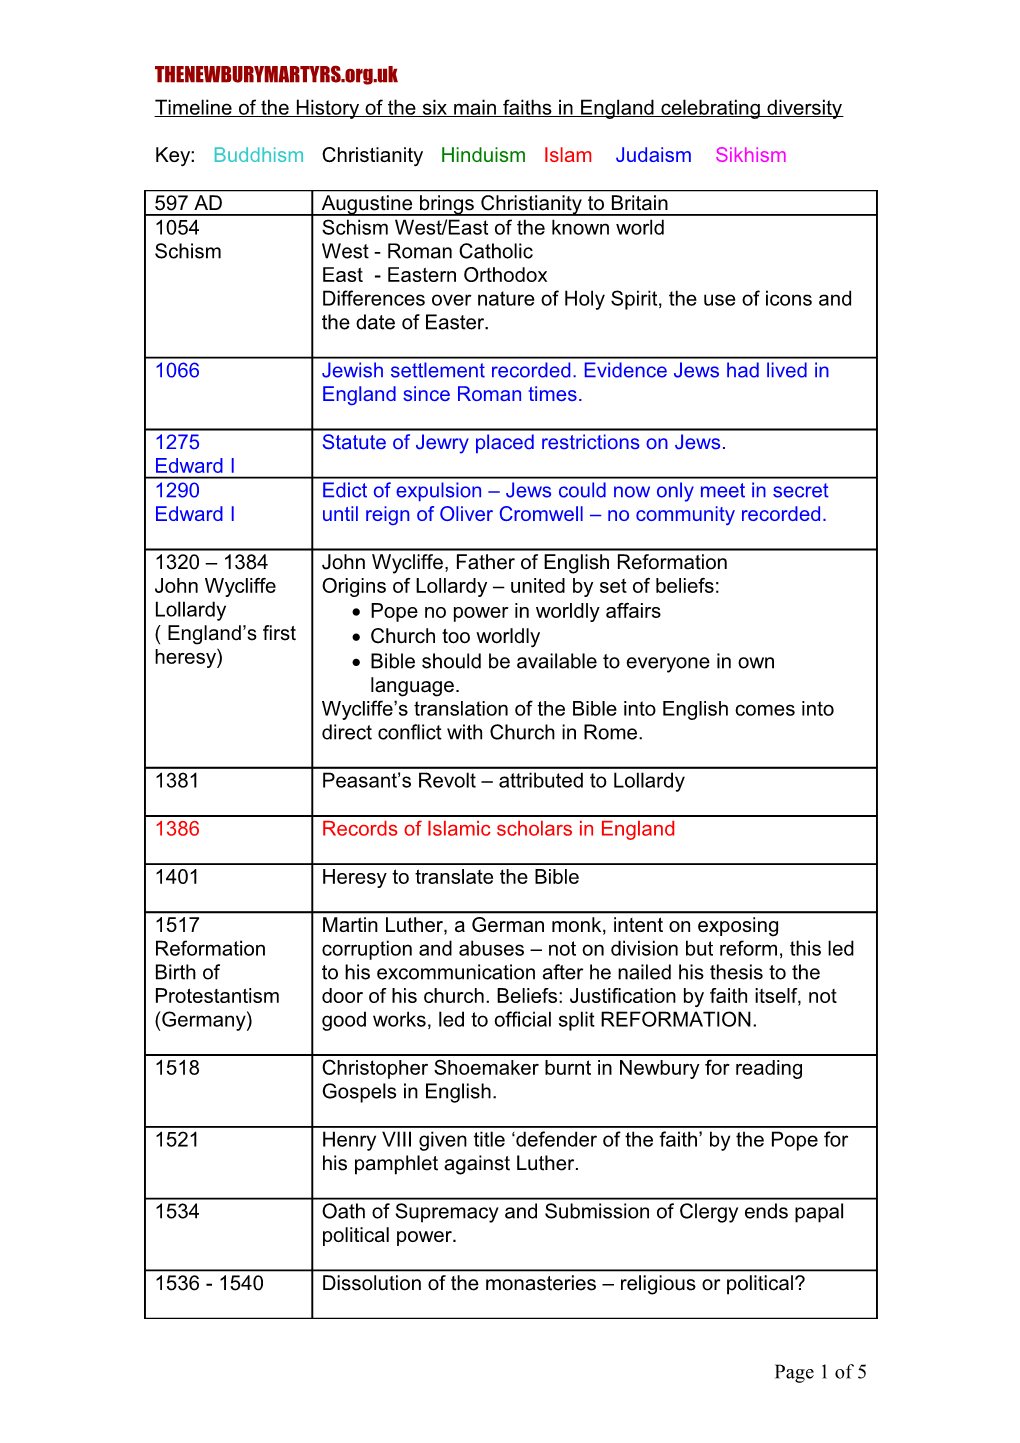 Time Line of History of Christianity in England